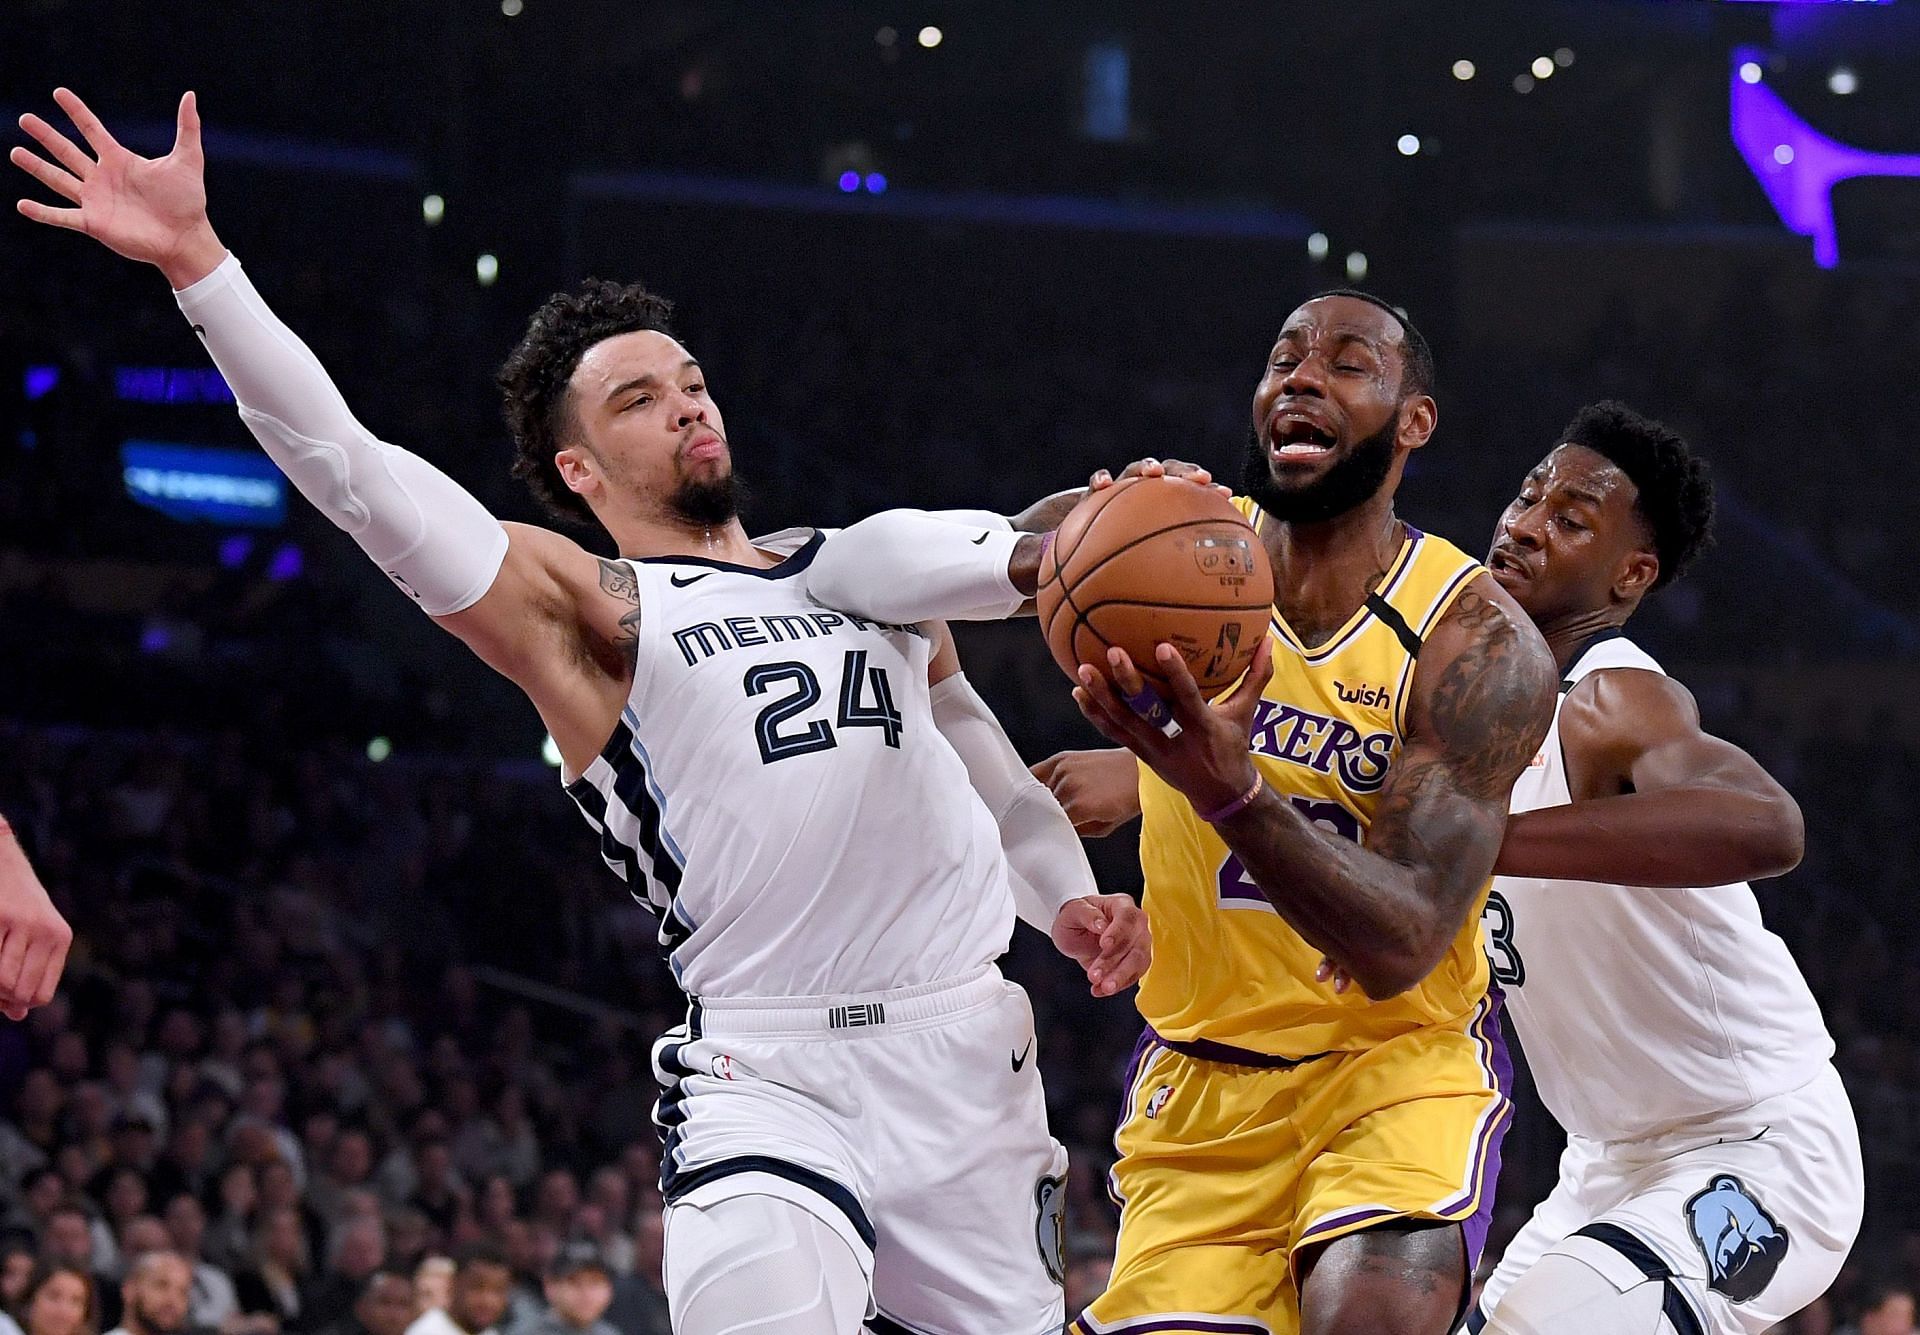 LeBron James of the Los Angeles Lakers against the Memphis Grizzlies.